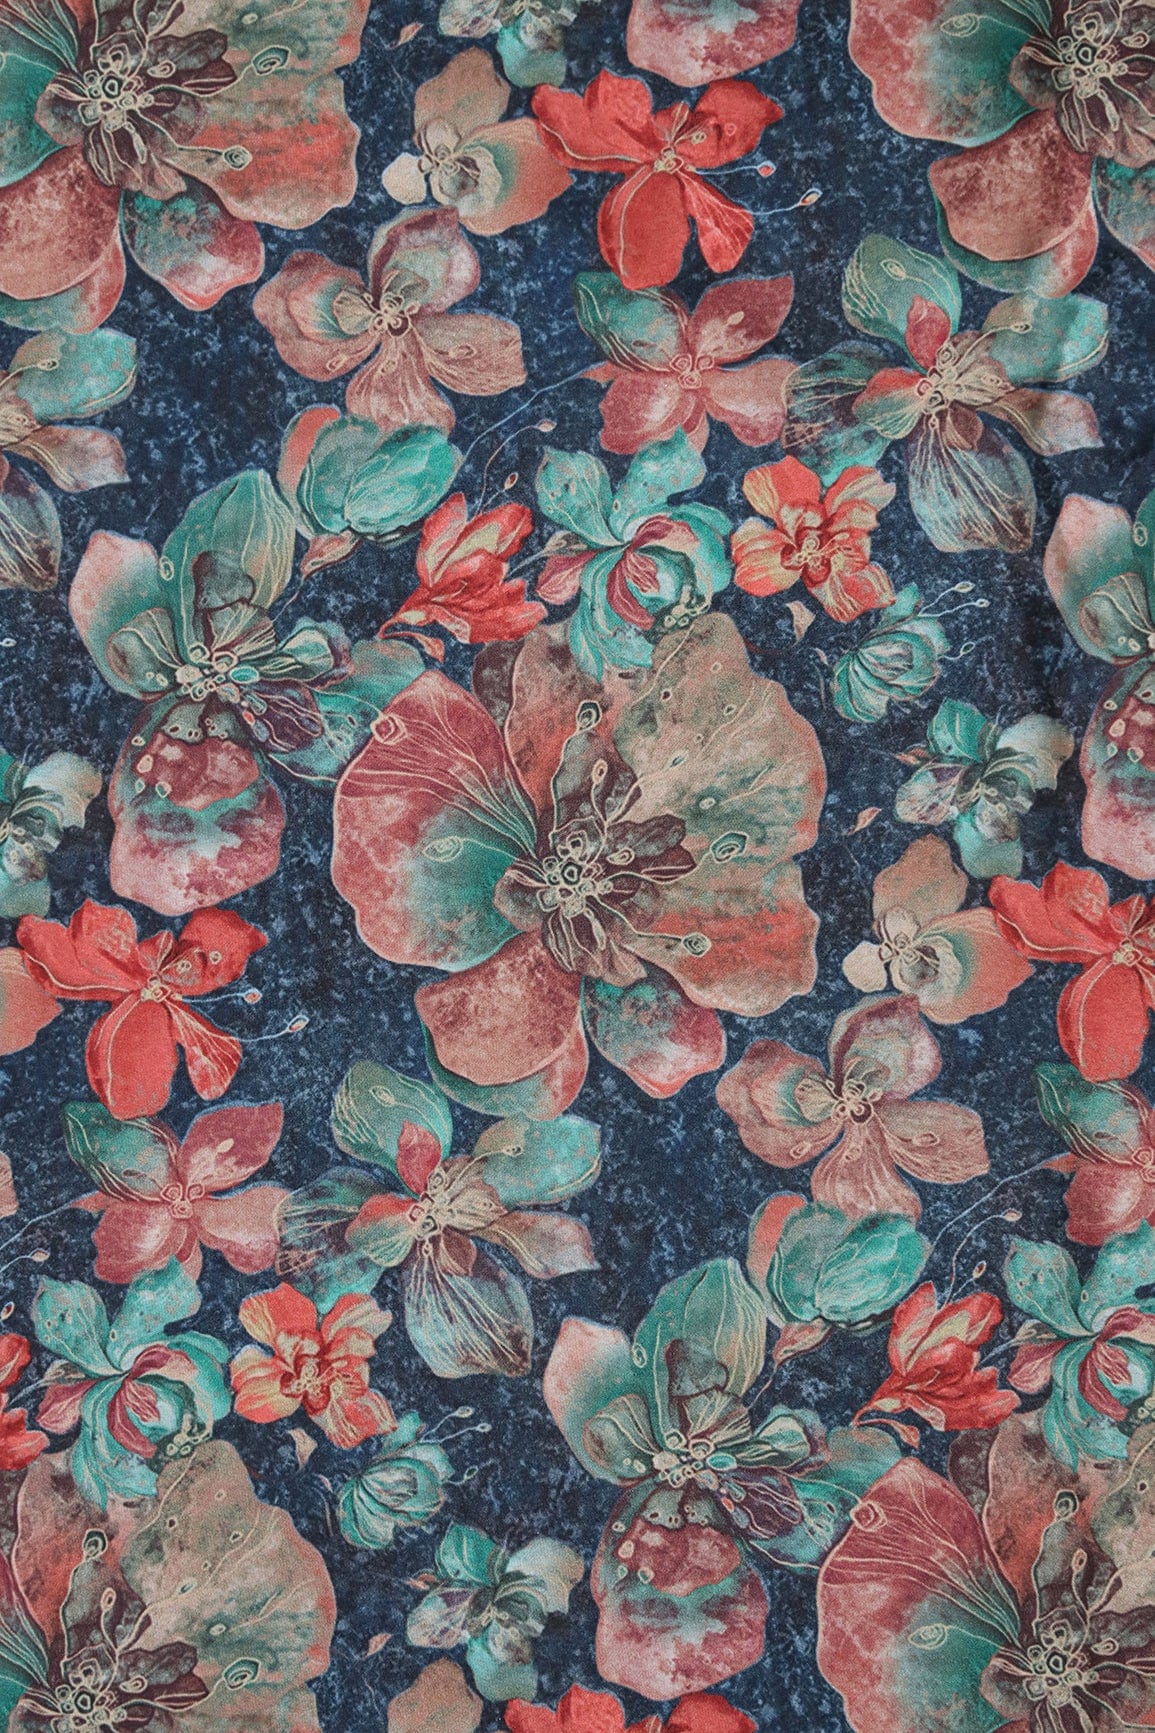 doeraa Prints Multicolor Floral Pattern Digital Print On Prussian Blue French Crepe Fabric